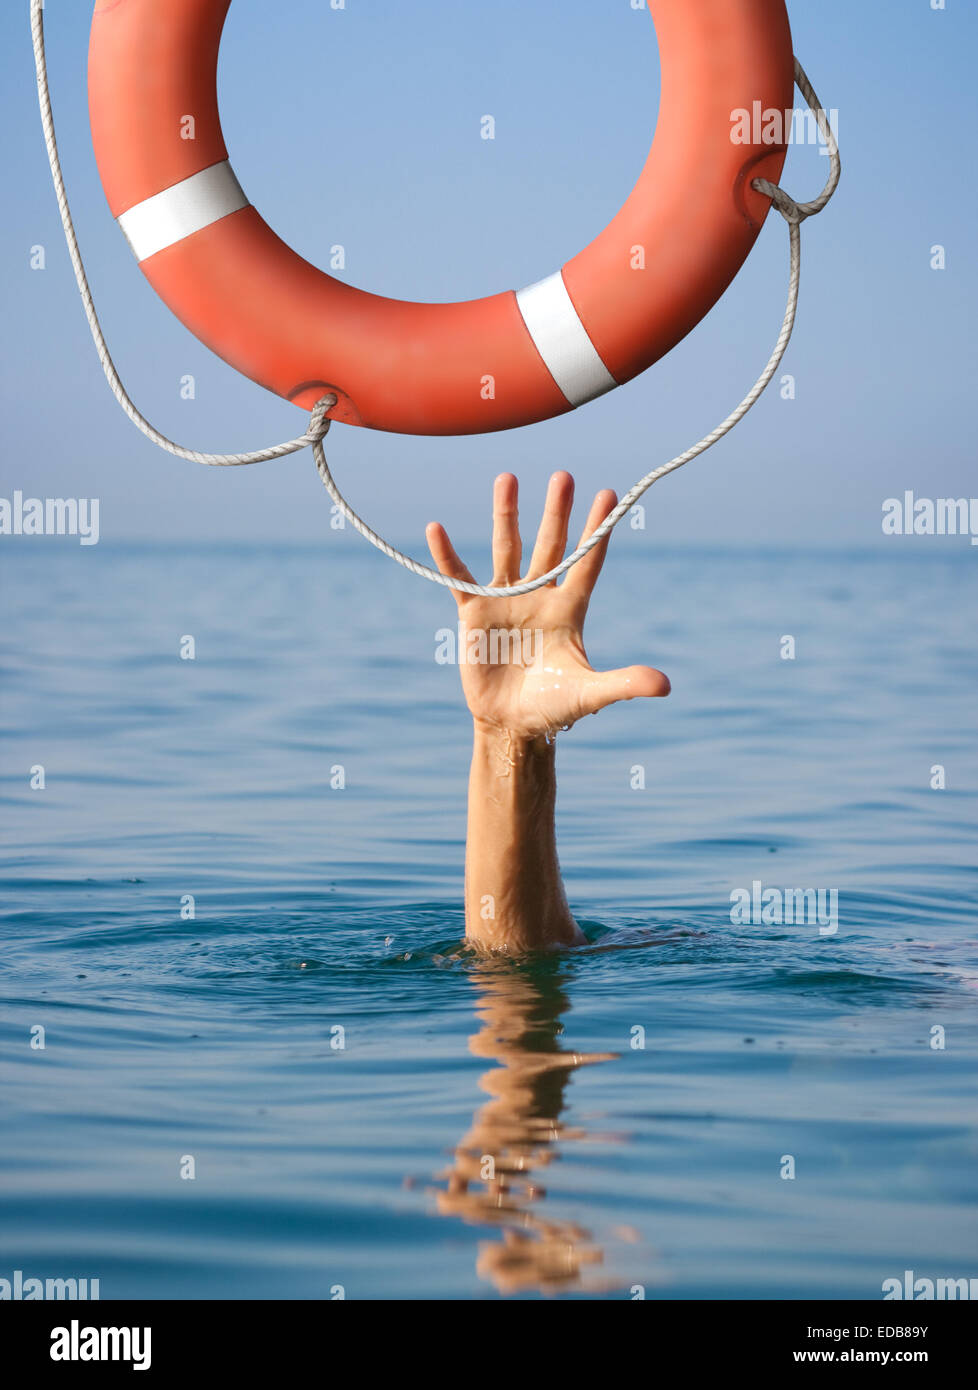 Lifebuoy for drowning man in sea or ocean water. Insurance concept. Stock Photo